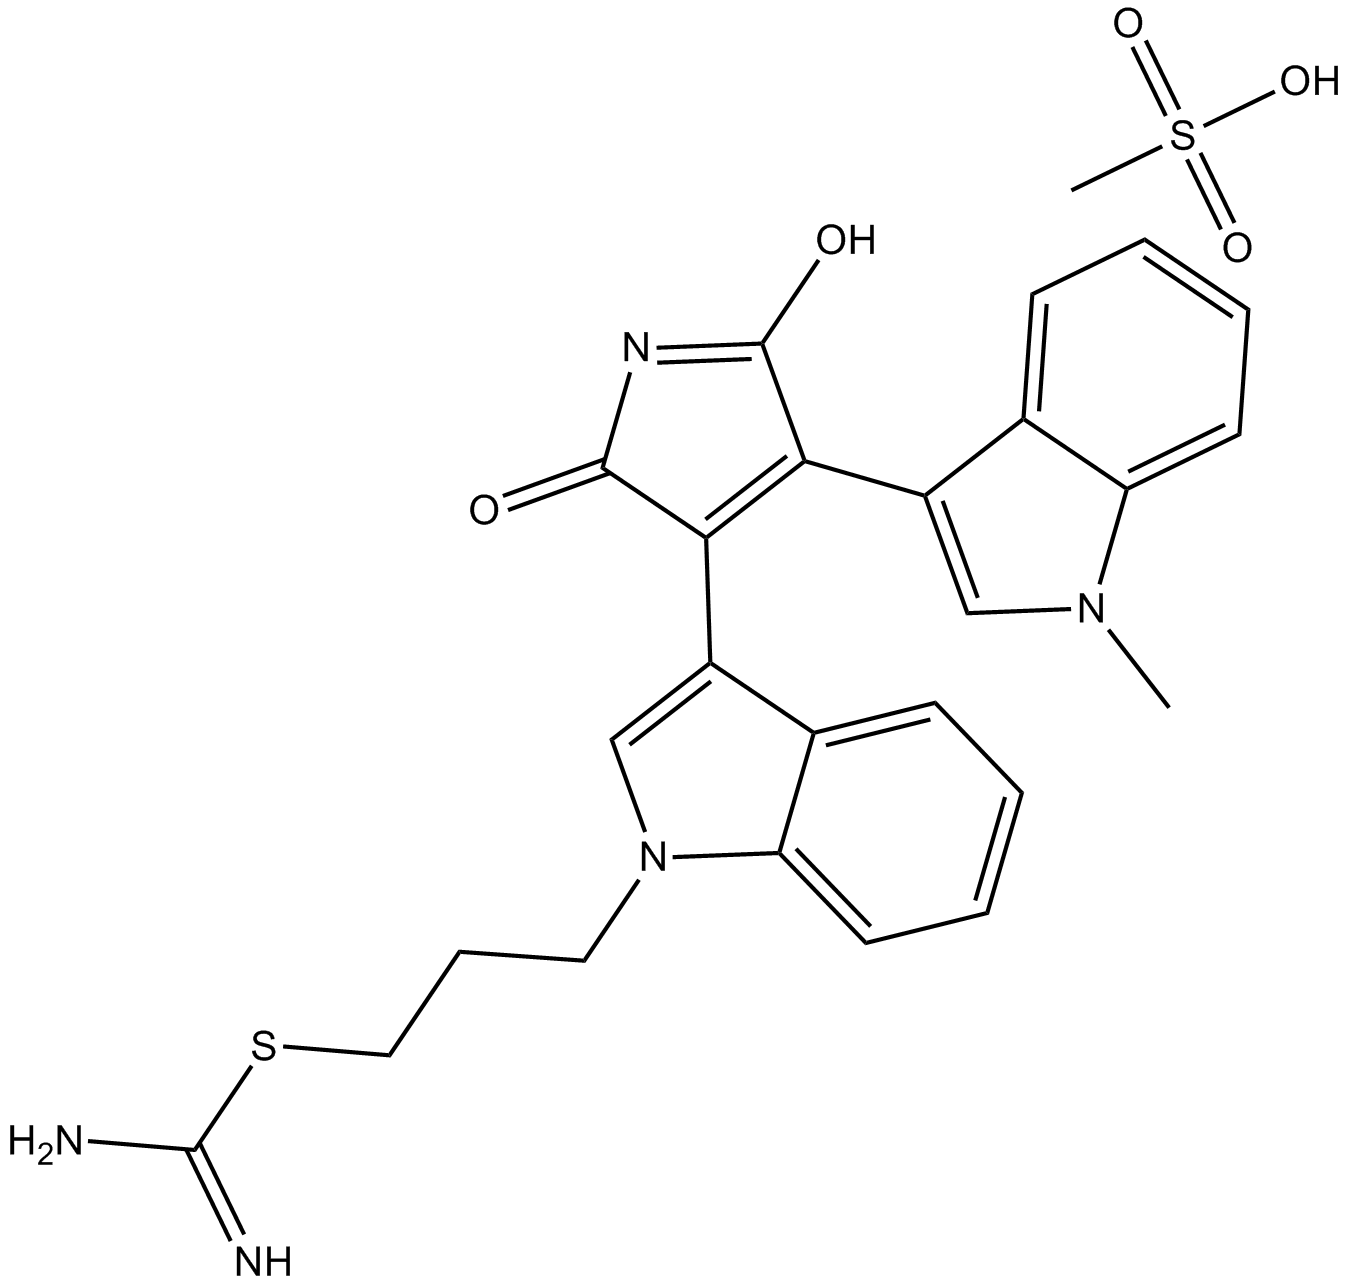 Ro 31-8220 methanesulfonate  Chemical Structure